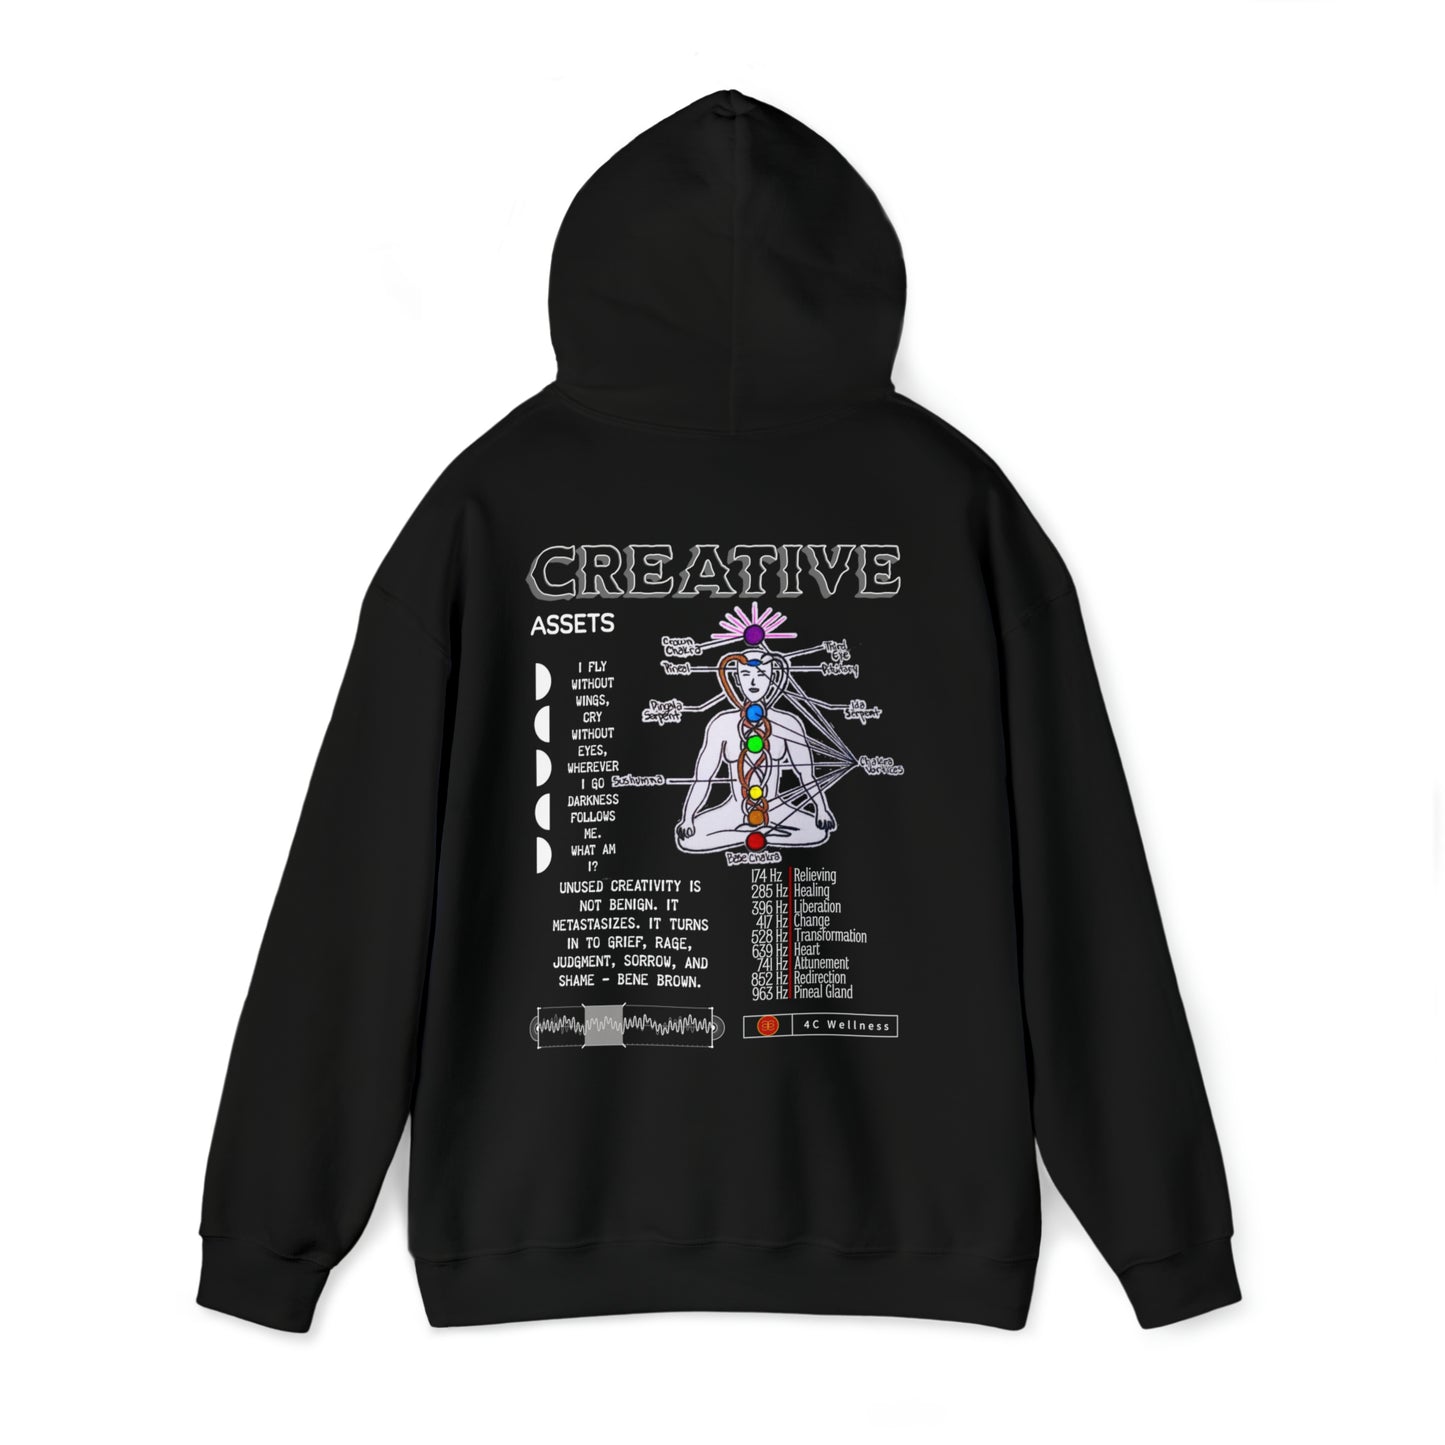 REALITY IS MELTING - GRAPHIC HOODIE.